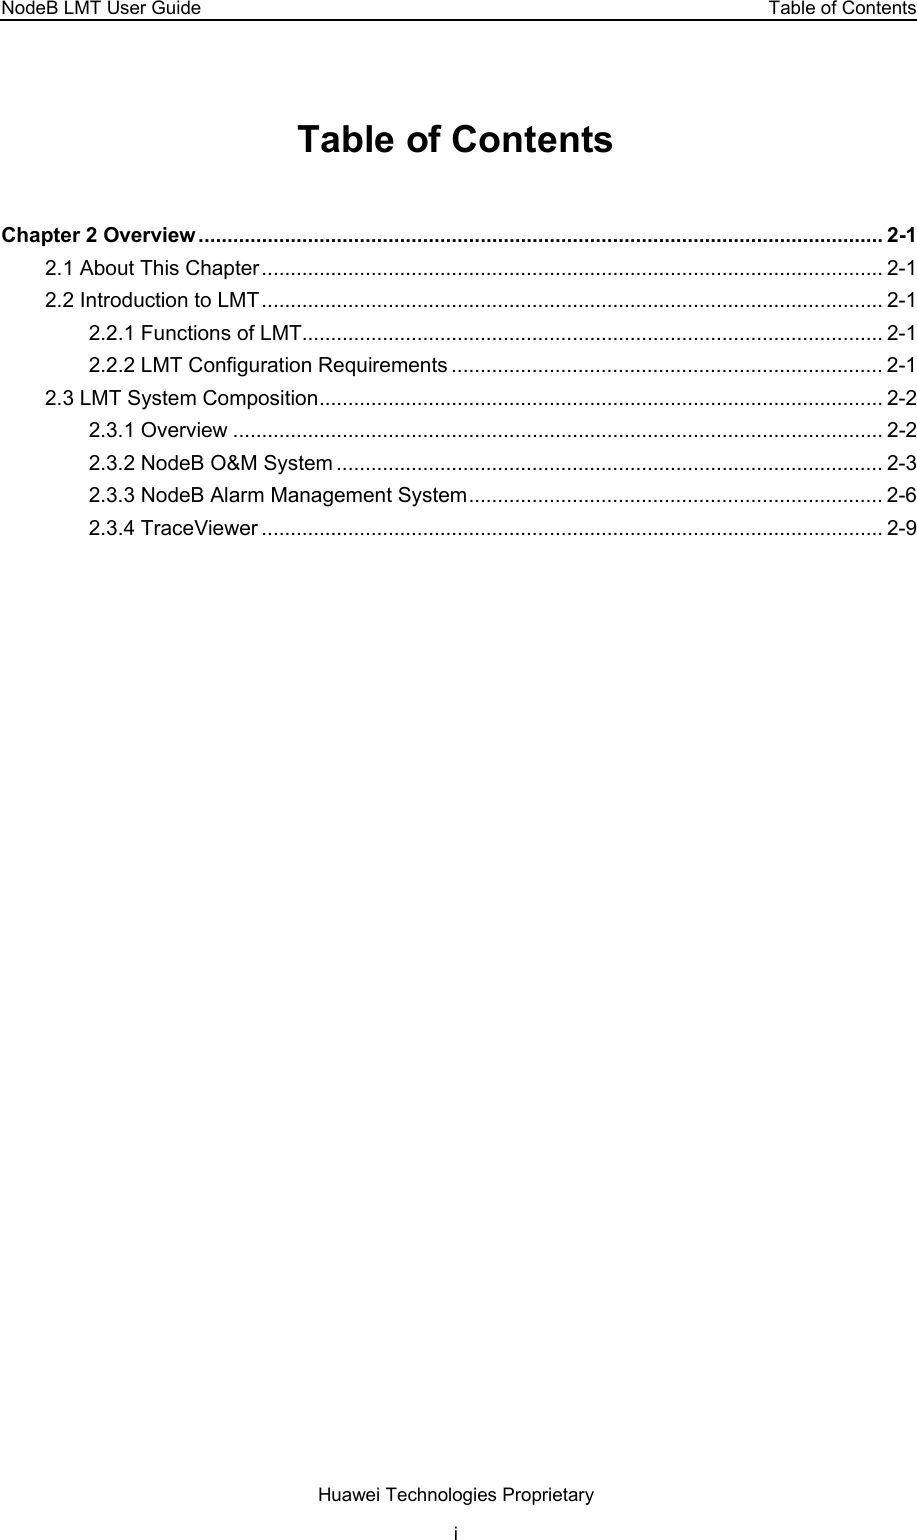 NodeB LMT User Guide  Table of Contents Table of Contents Chapter 2 Overview....................................................................................................................... 2-1 2.1 About This Chapter............................................................................................................ 2-1 2.2 Introduction to LMT............................................................................................................ 2-1 2.2.1 Functions of LMT..................................................................................................... 2-1 2.2.2 LMT Configuration Requirements ........................................................................... 2-1 2.3 LMT System Composition.................................................................................................. 2-2 2.3.1 Overview ................................................................................................................. 2-2 2.3.2 NodeB O&amp;M System ............................................................................................... 2-3 2.3.3 NodeB Alarm Management System........................................................................ 2-6 2.3.4 TraceViewer ............................................................................................................ 2-9 Huawei Technologies Proprietary i 